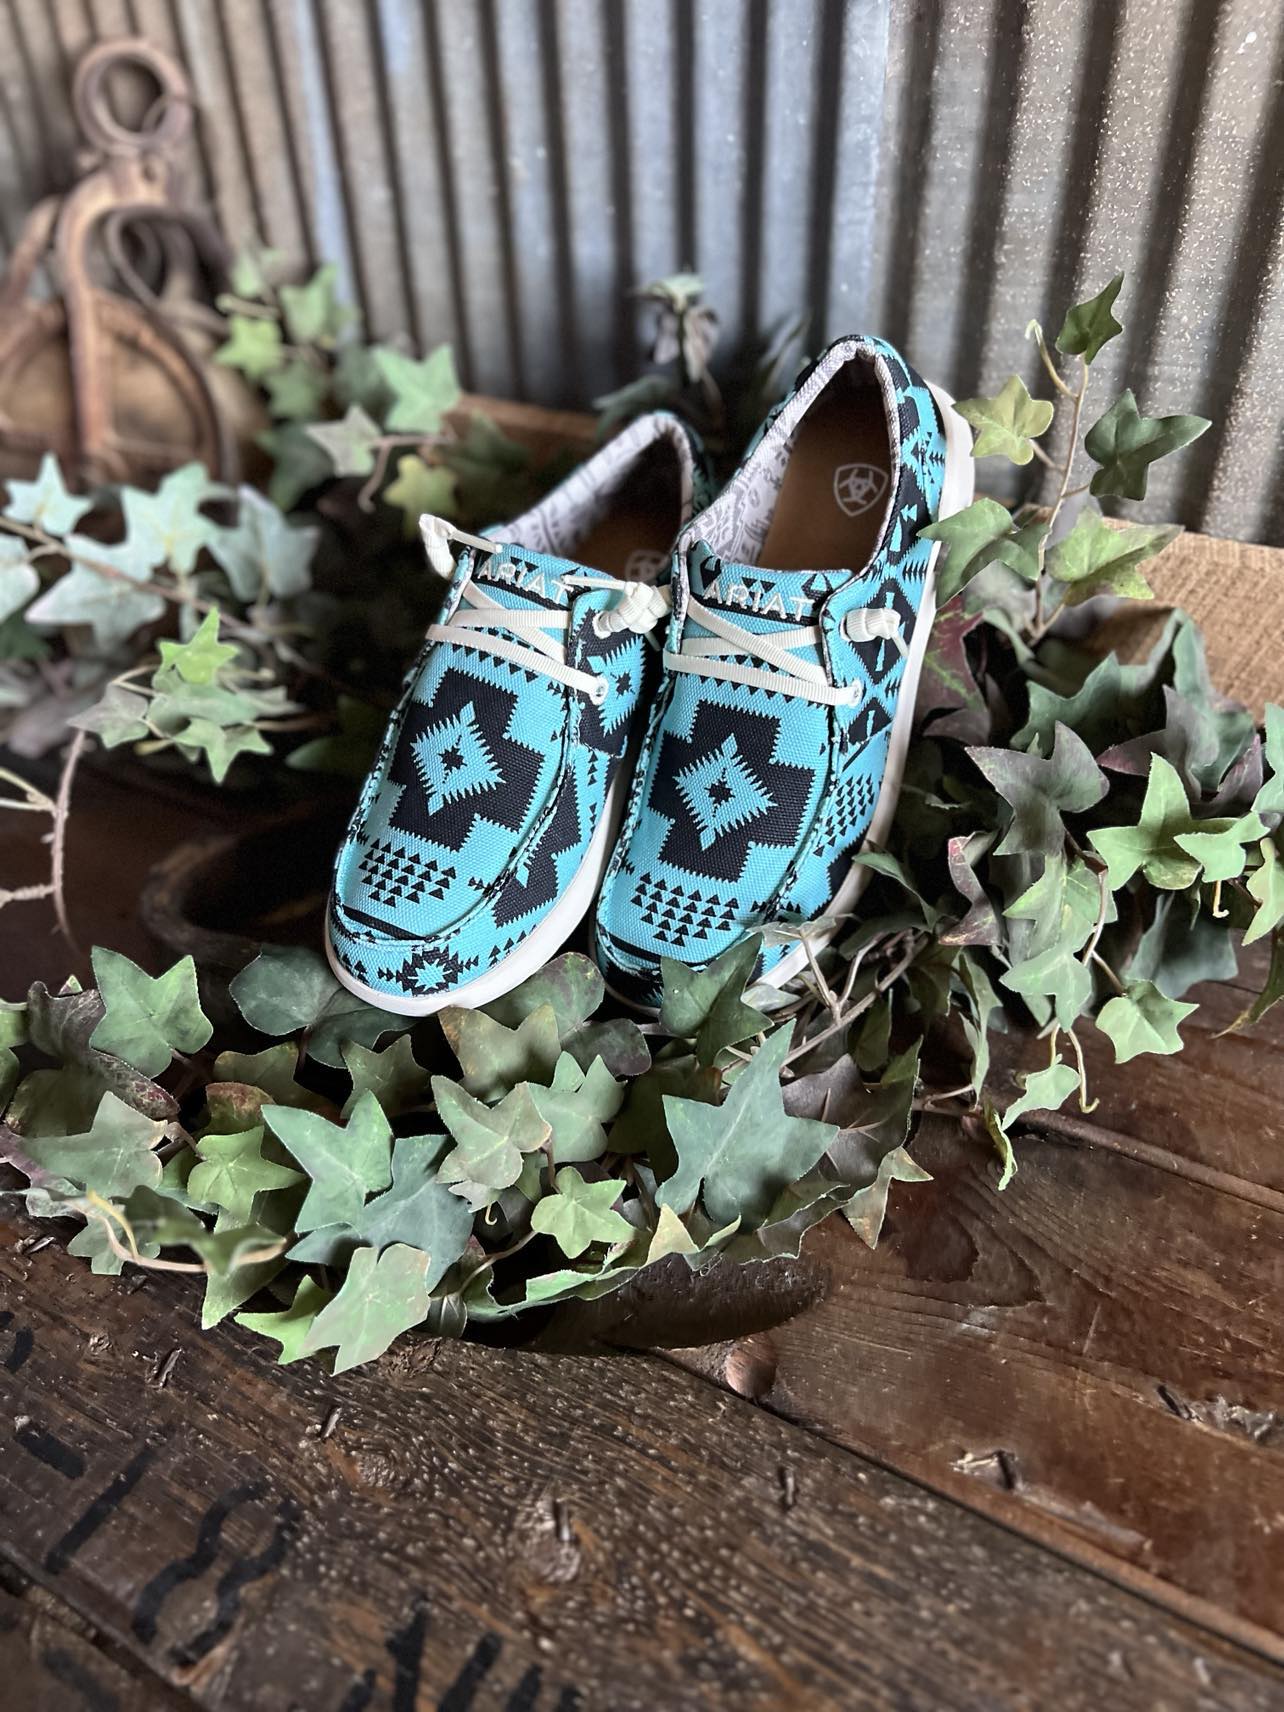 Womens Ariat Hilo Sneaker in Turquoise Saddle Blanket-Women's Casual Shoes-Ariat-Lucky J Boots & More, Women's, Men's, & Kids Western Store Located in Carthage, MO